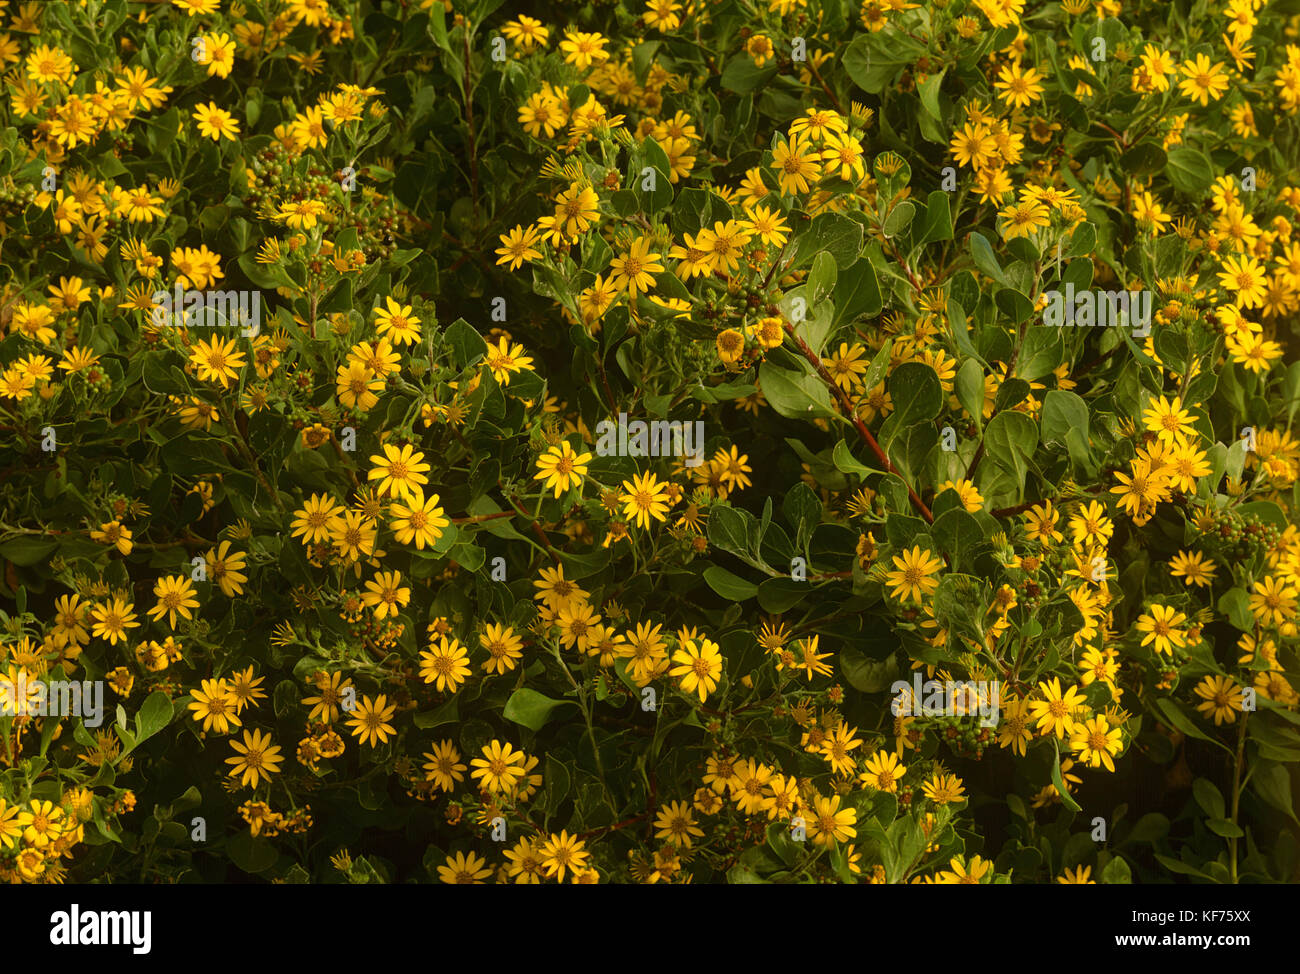 Bitou bush (Chrysanthemoides monilifera rotundata), with mass of bright yellow flowers, an invasive South African species naturalised in Queensland an Stock Photo